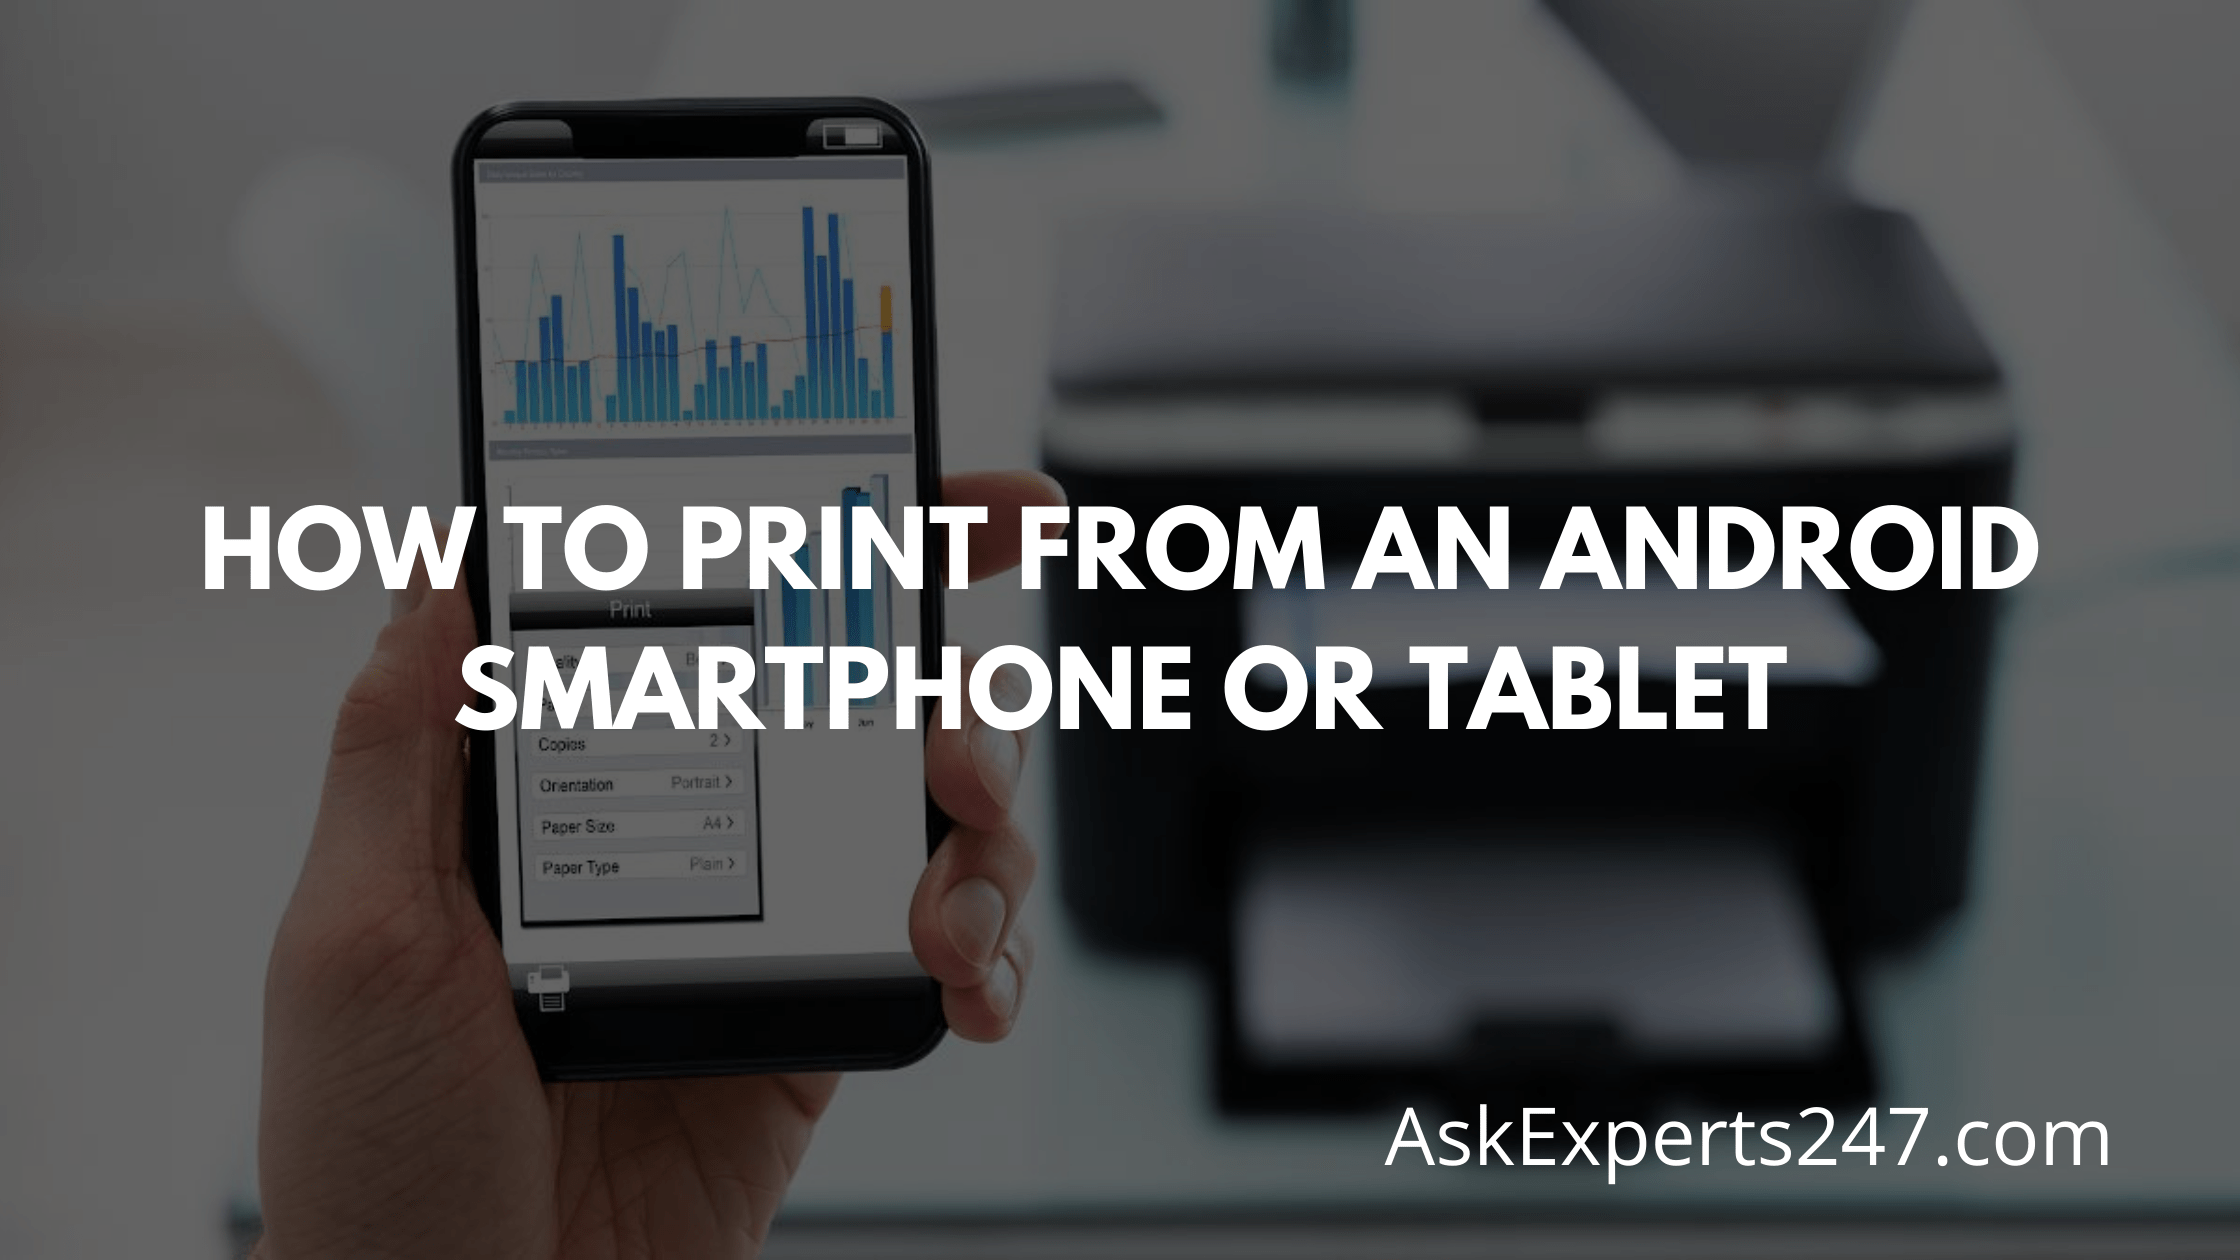 How to Print from an Android Smartphone or Tablet - Ask Experts 247